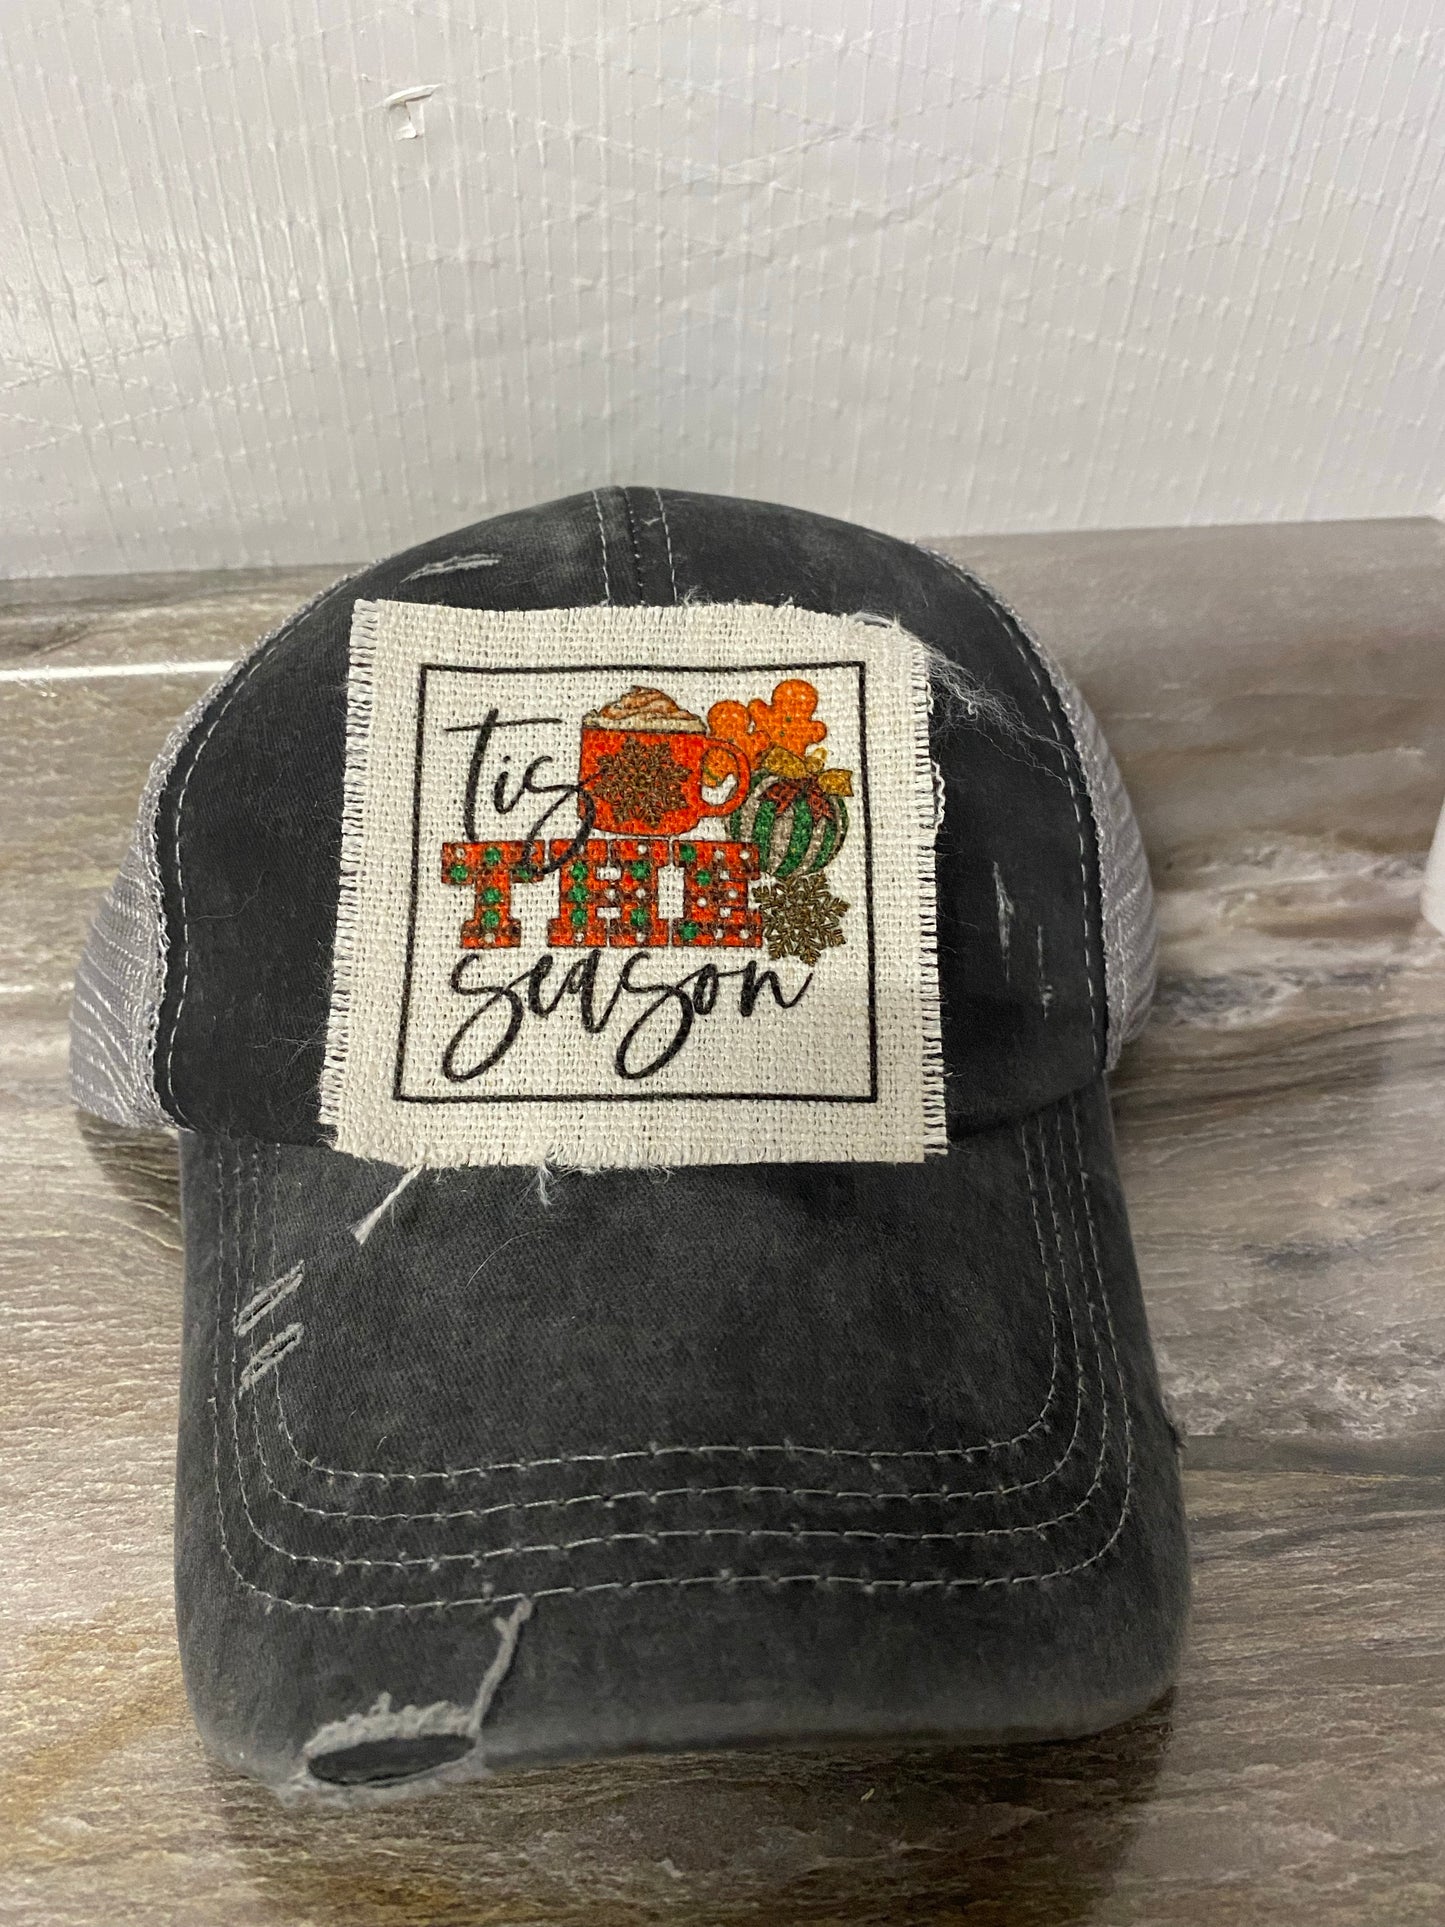 Tis' The Season Mug and Ornament Hat Patch